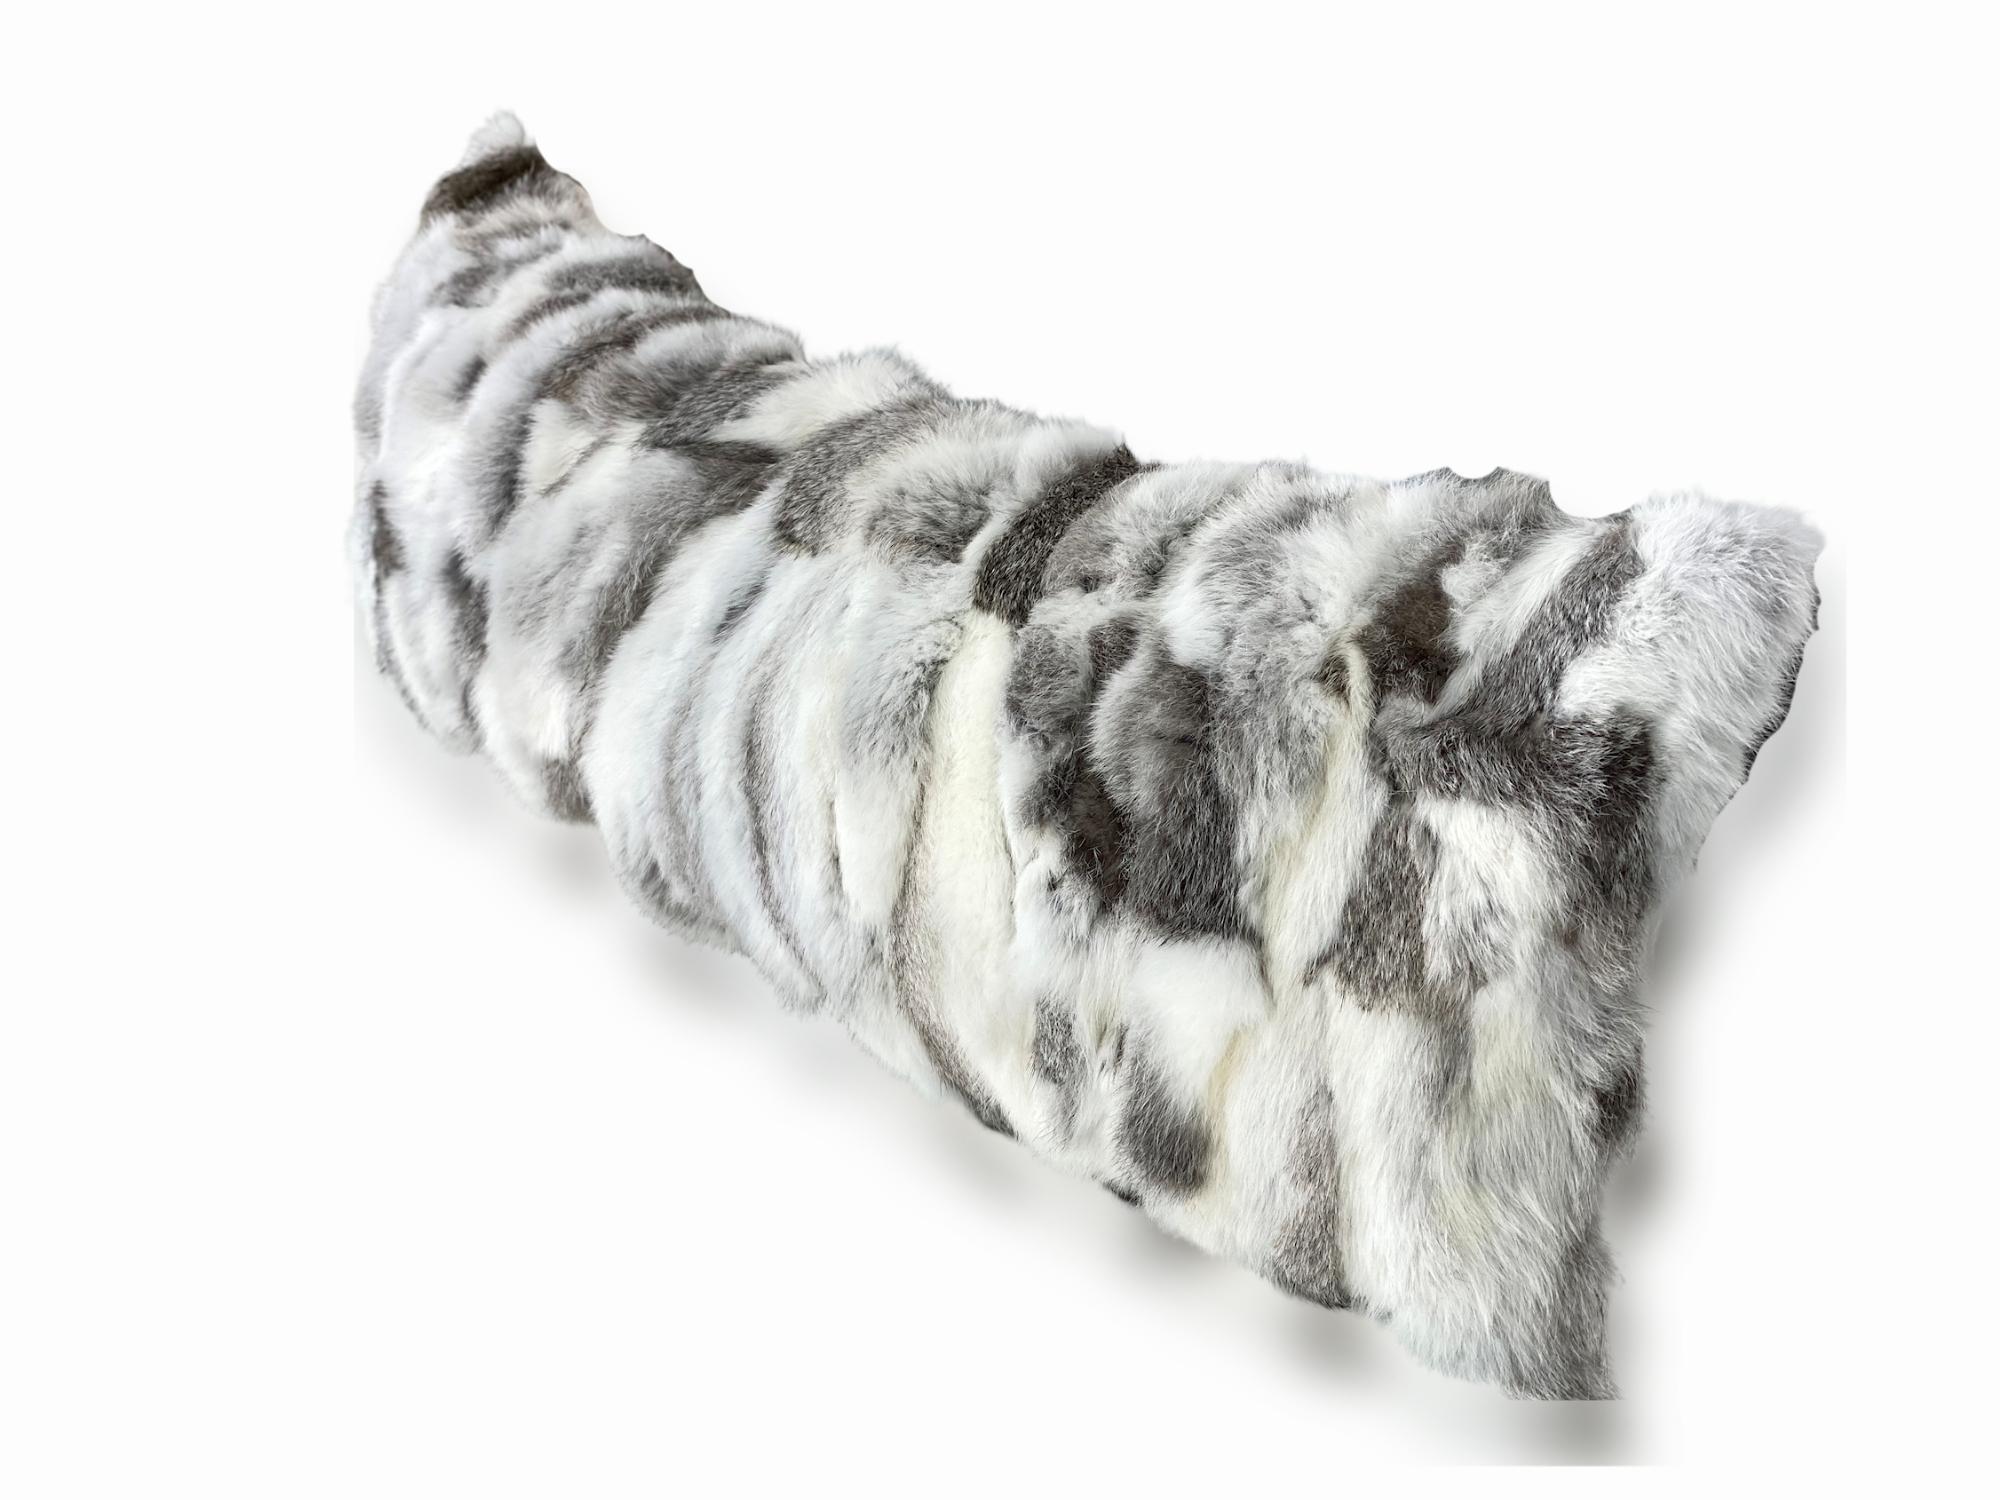 Luxurious and decadent, this fur bedroom pillow embraces natural styling. Handcrafted from ethically sourced rabbit fur skins, the long lumbar pillow looks ravishing spread across a bed on its own or with other bedroom cushions. Featuring striking